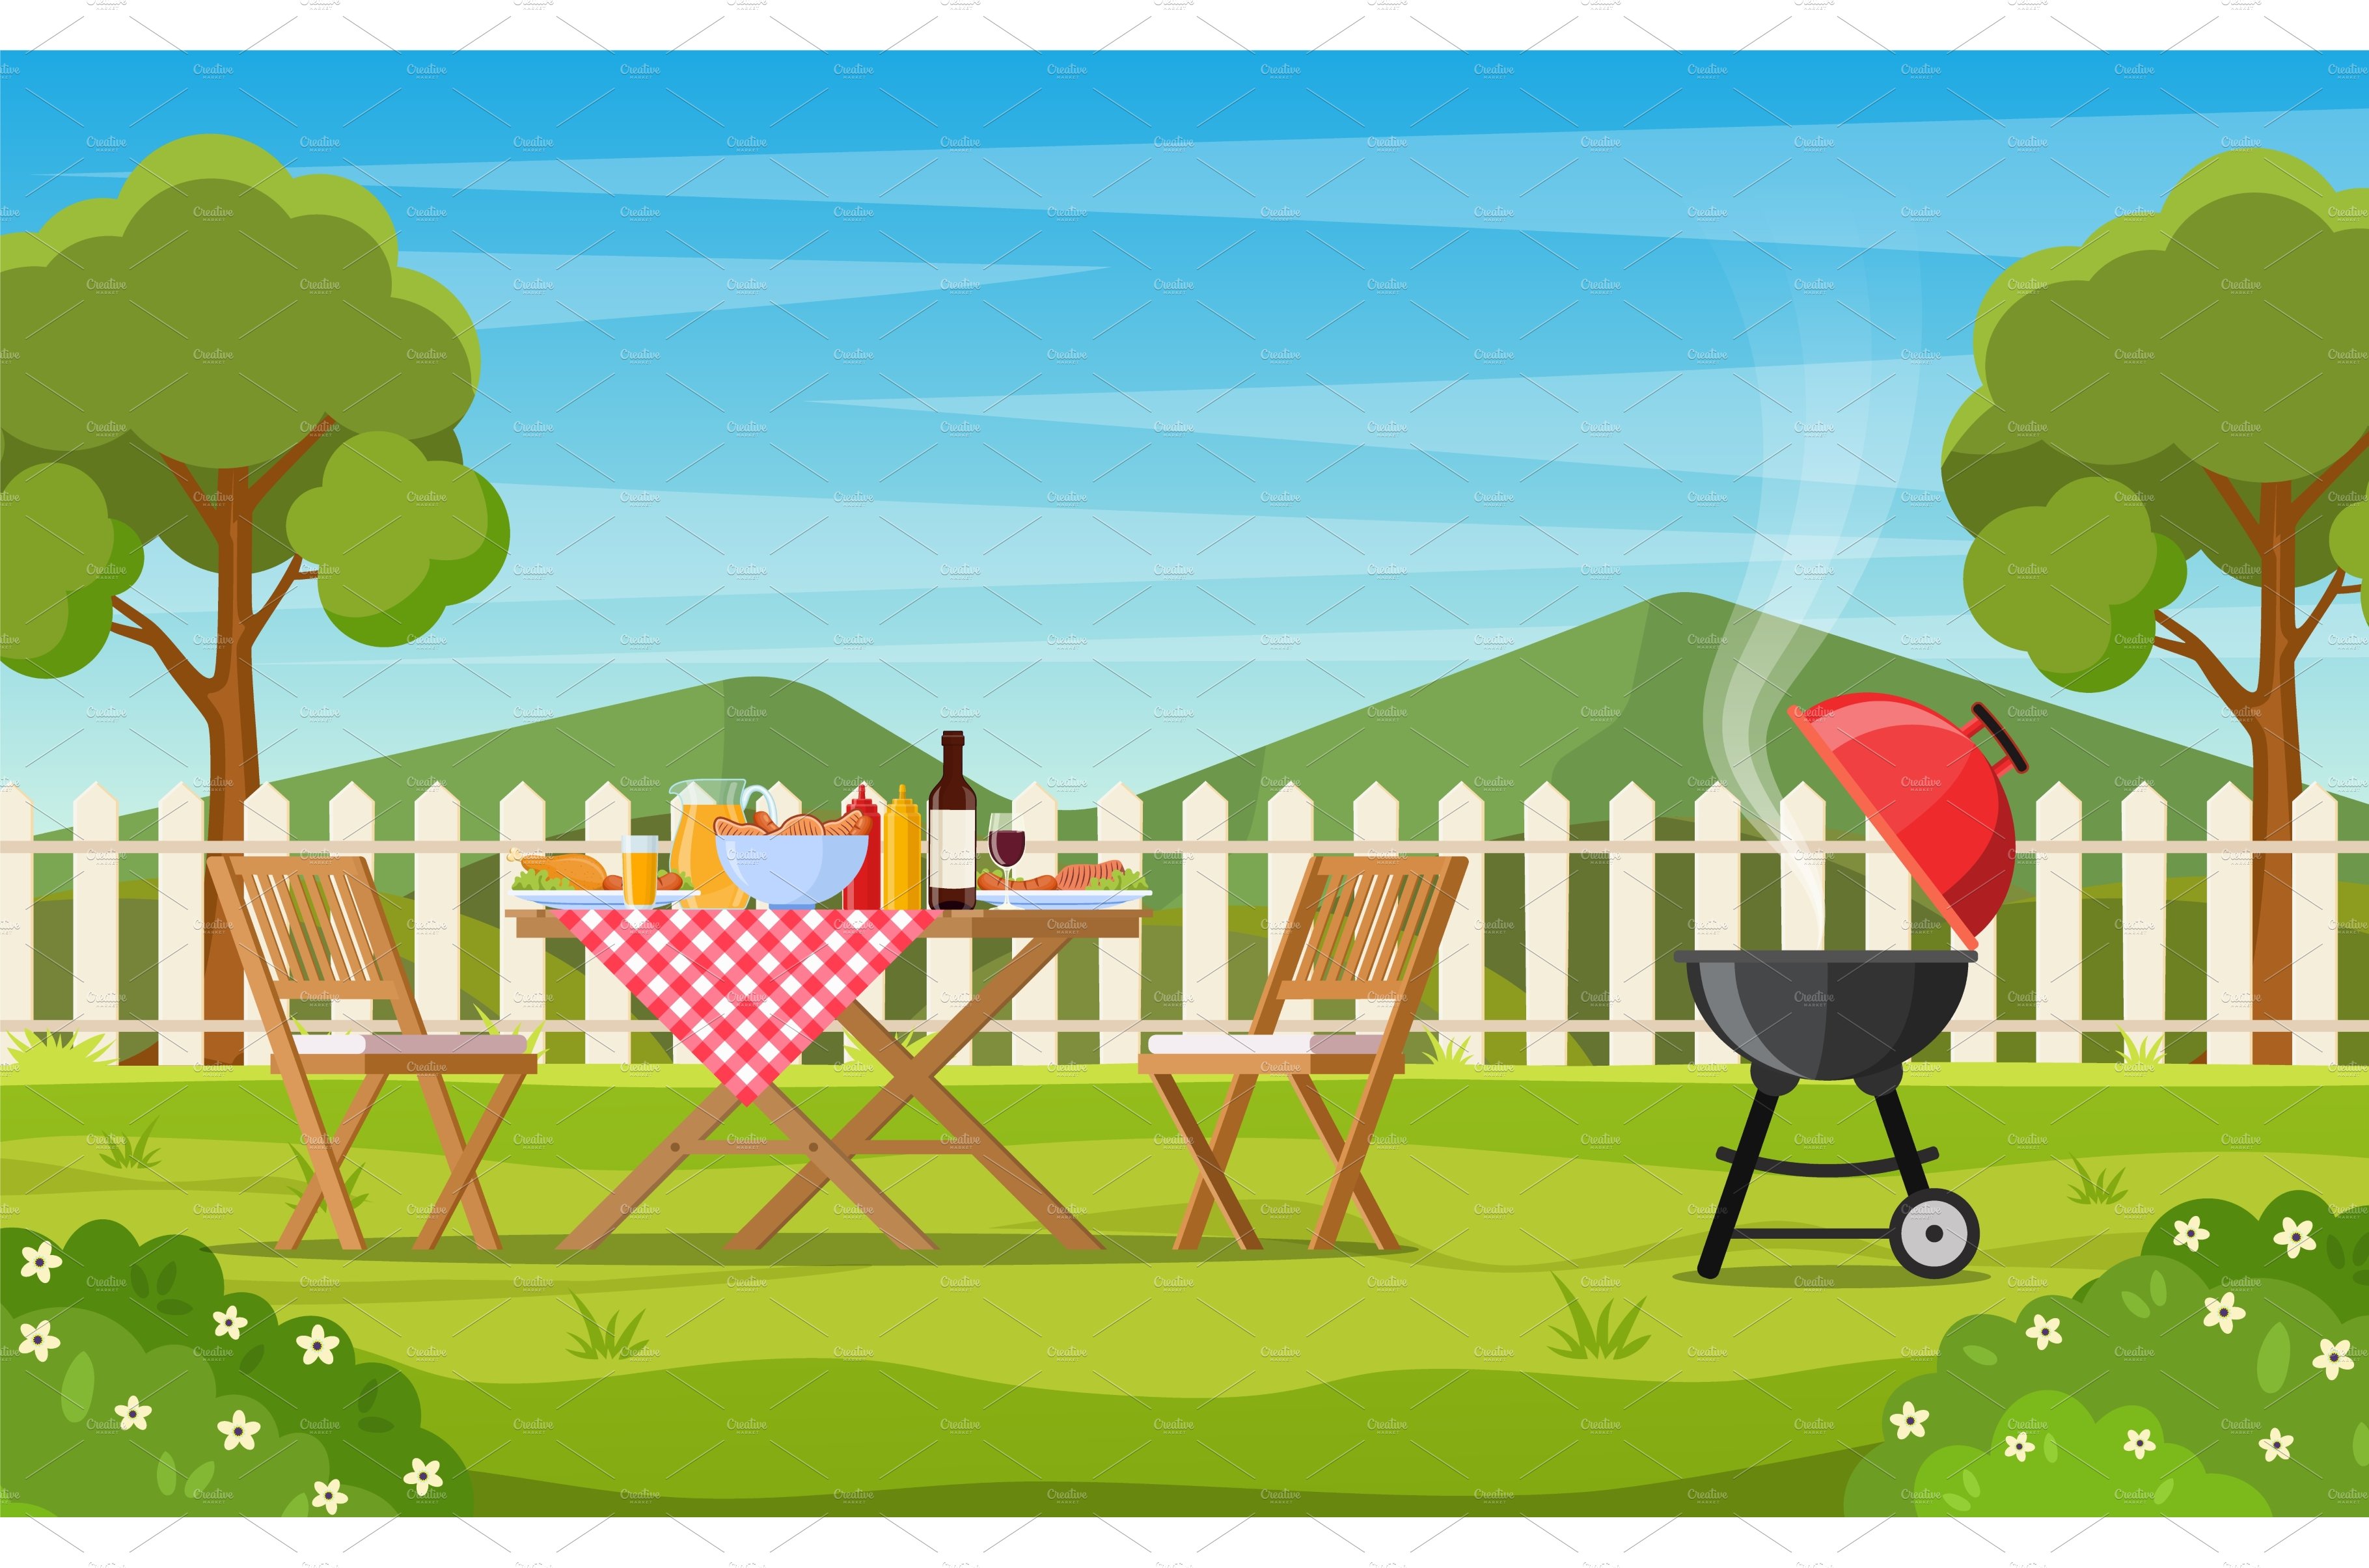 Barbecue party in the backyard with cover image.